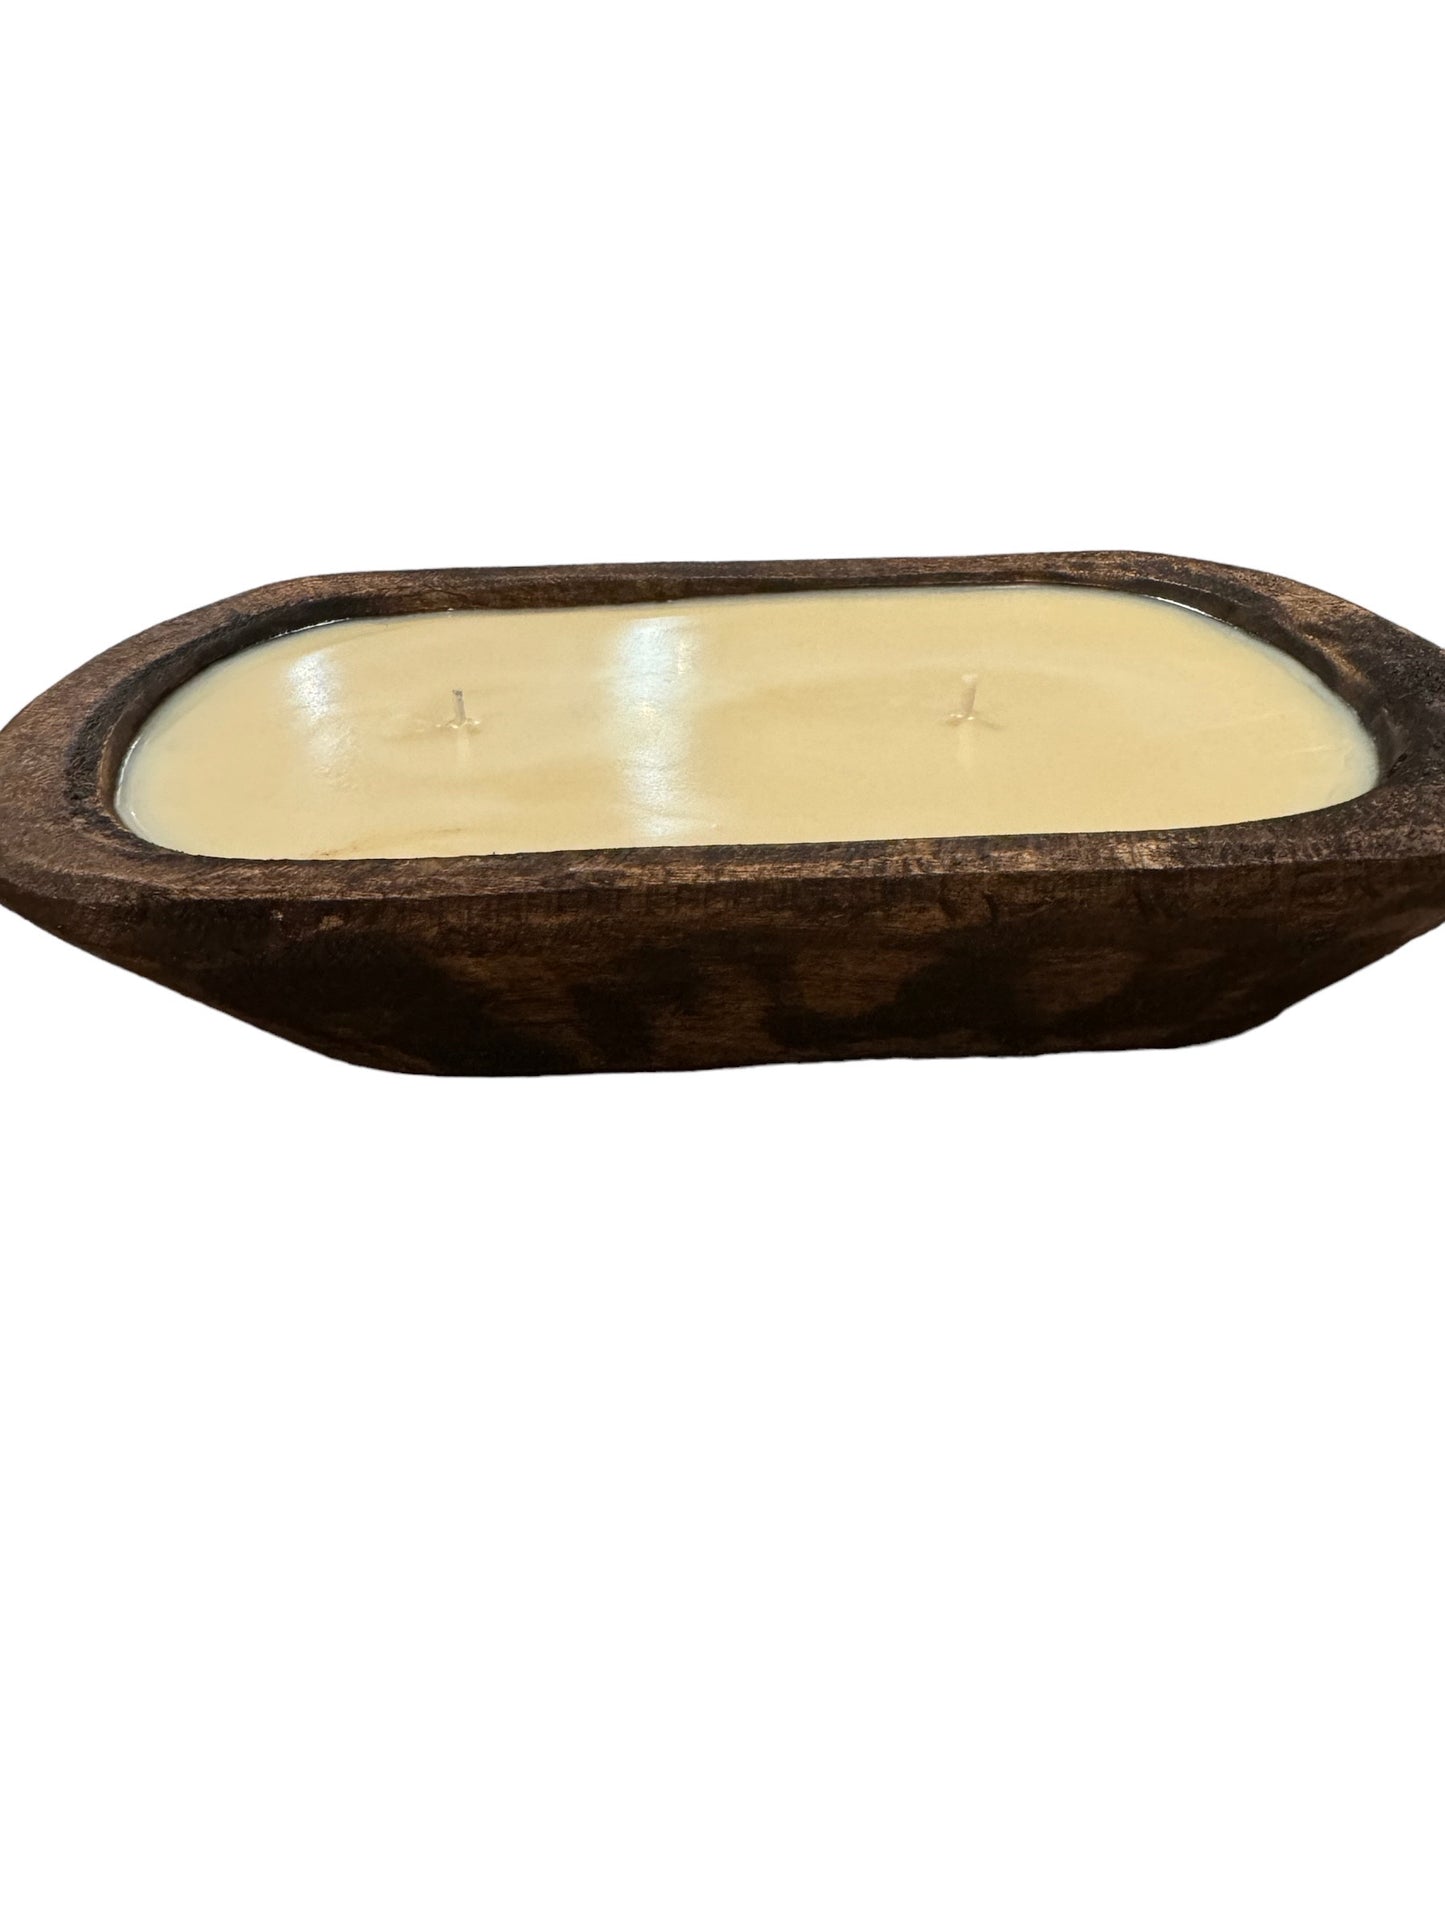 Teak Wood Dough Bowl Hand Carved Soy Candle Scented Vanilla Pecan